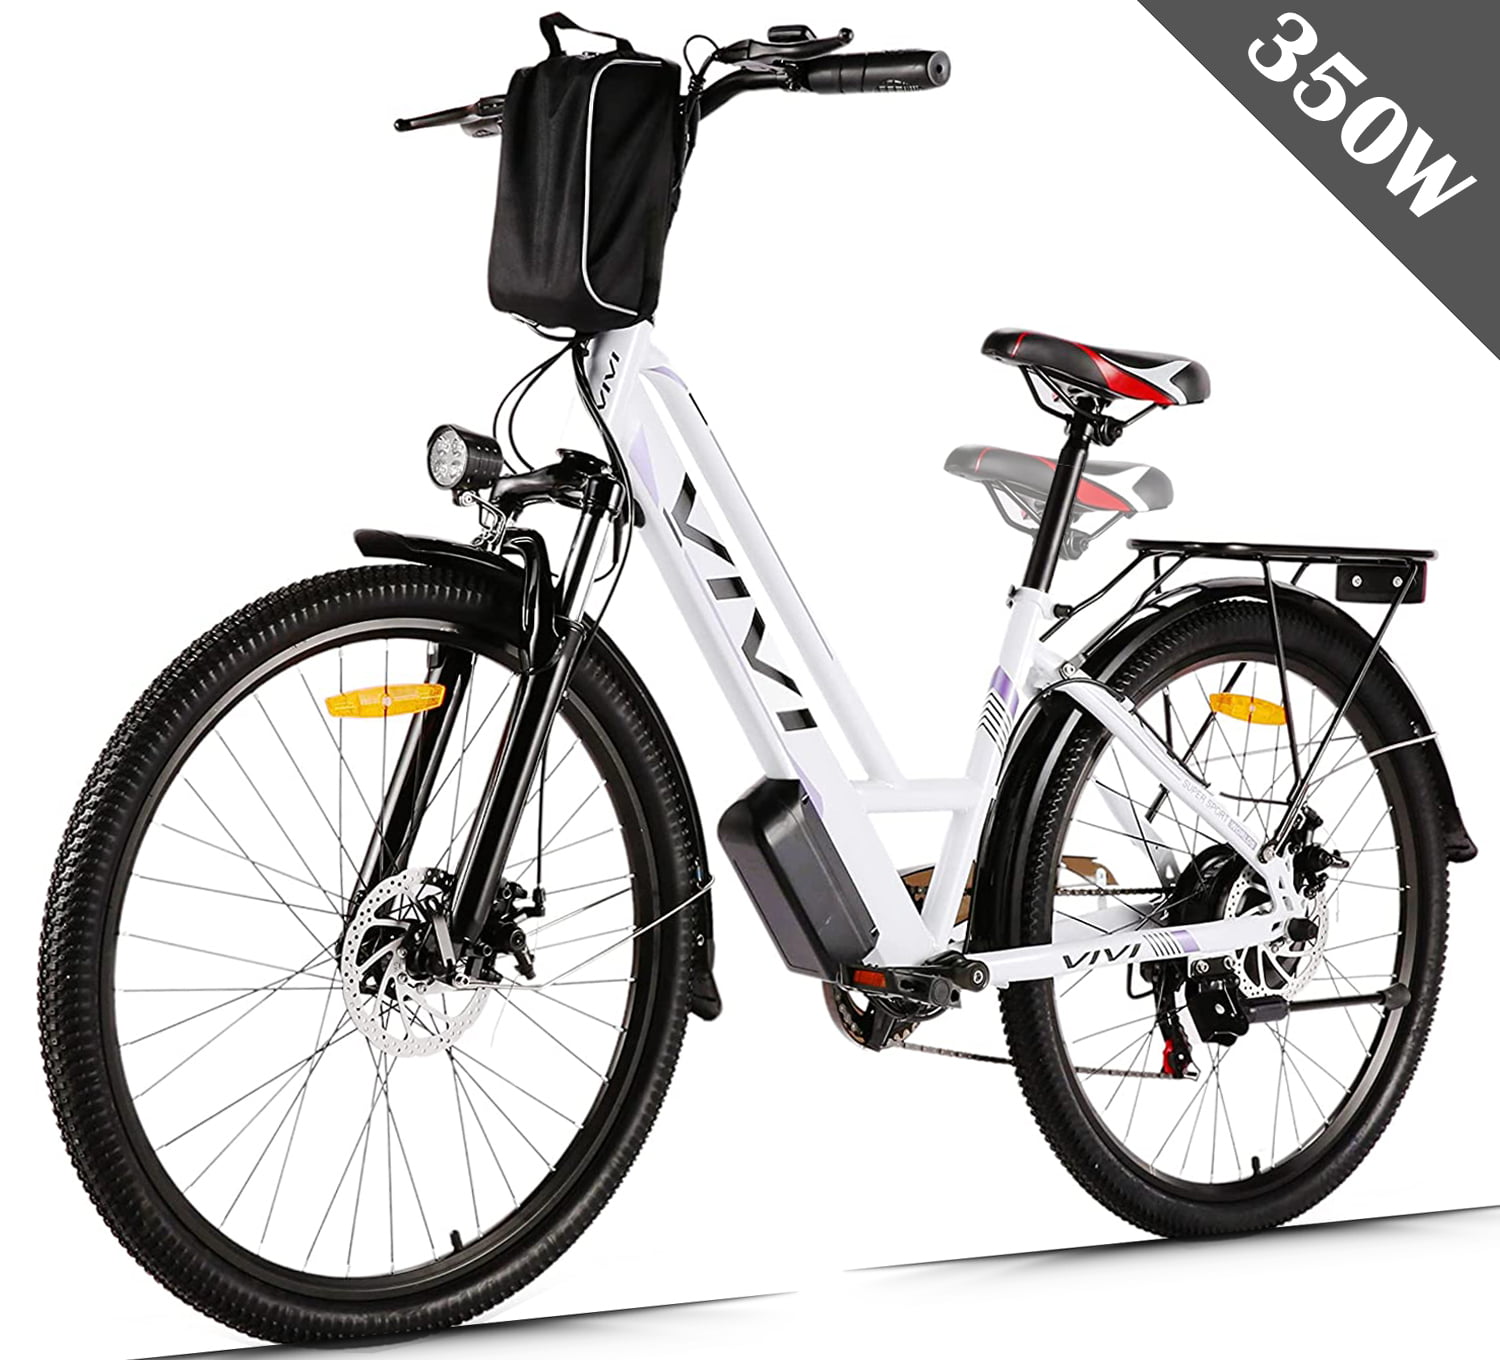 Details about   20In 7-speed Folding Bike Compact Suspension City Commuters Bicycle Xmas Gifts 